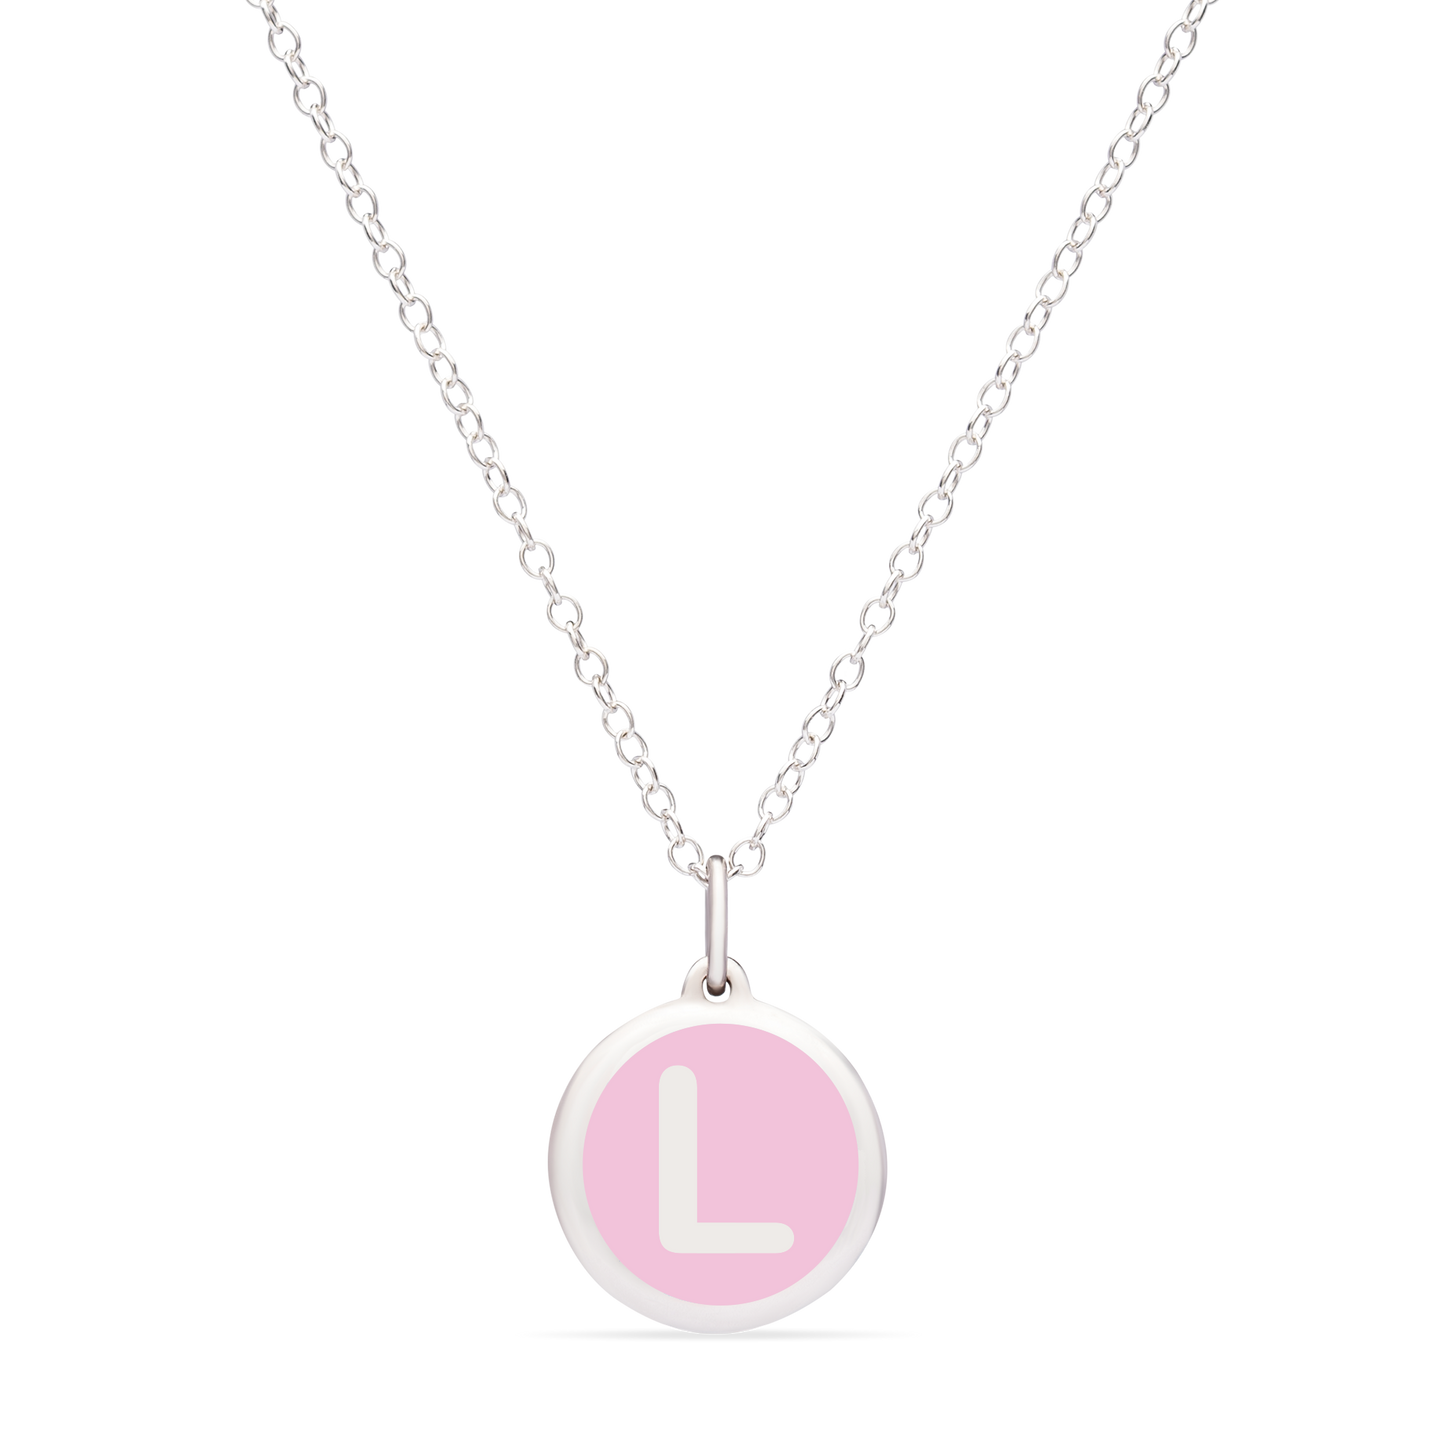 MINI INITIAL 'L' CHARM sterling silver with rhodium plate